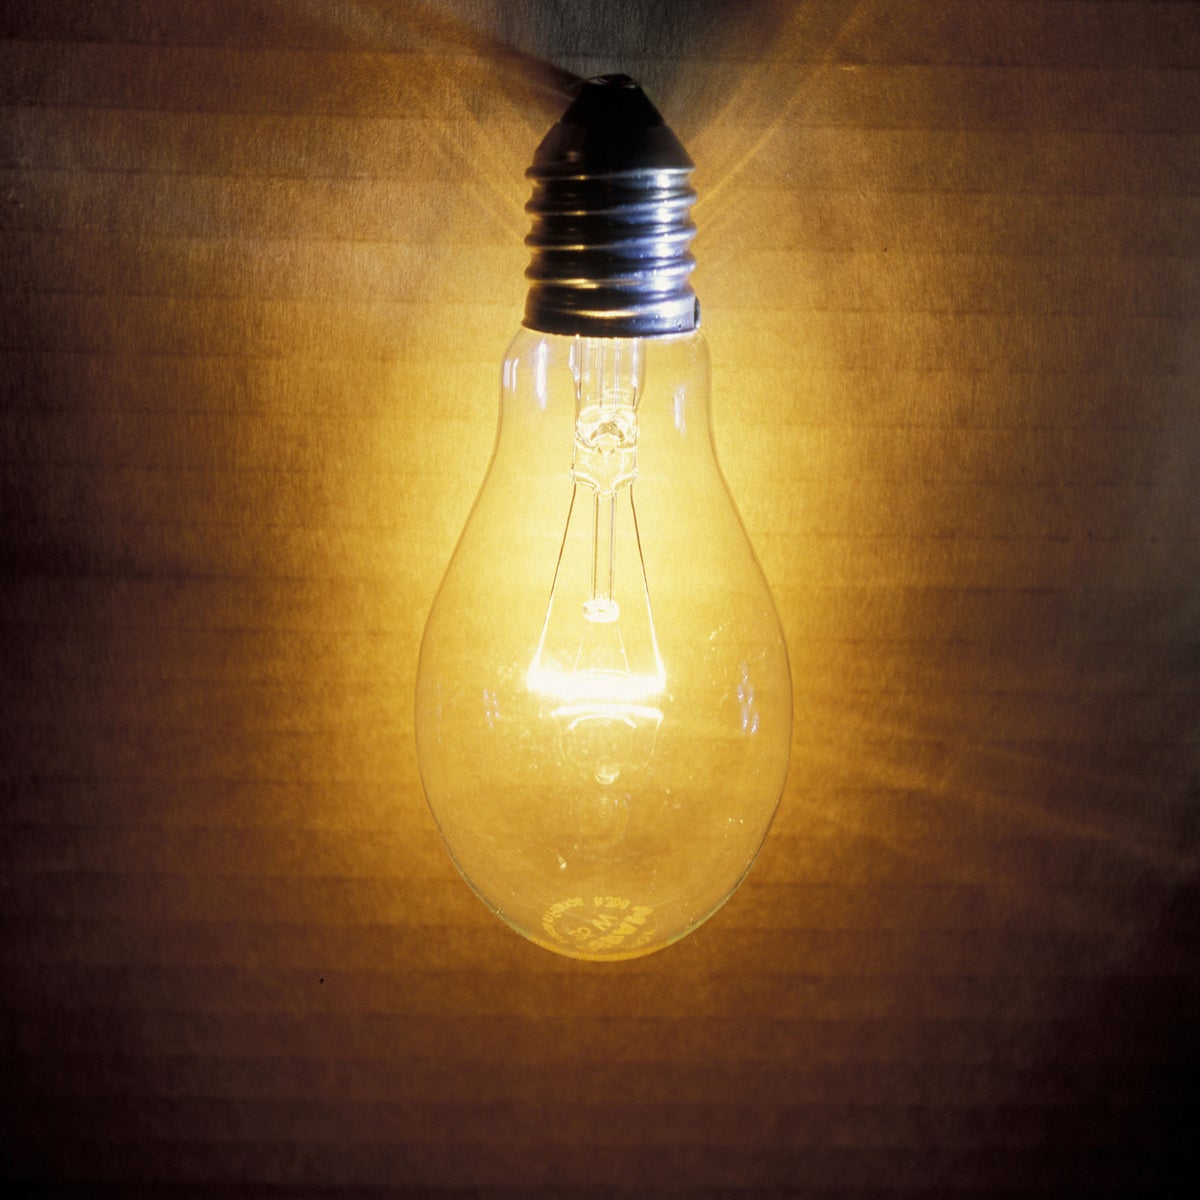 Old-fashioned light bulbs could be set comeback after 'light recycling' breakthrough | The Independent | The Independent